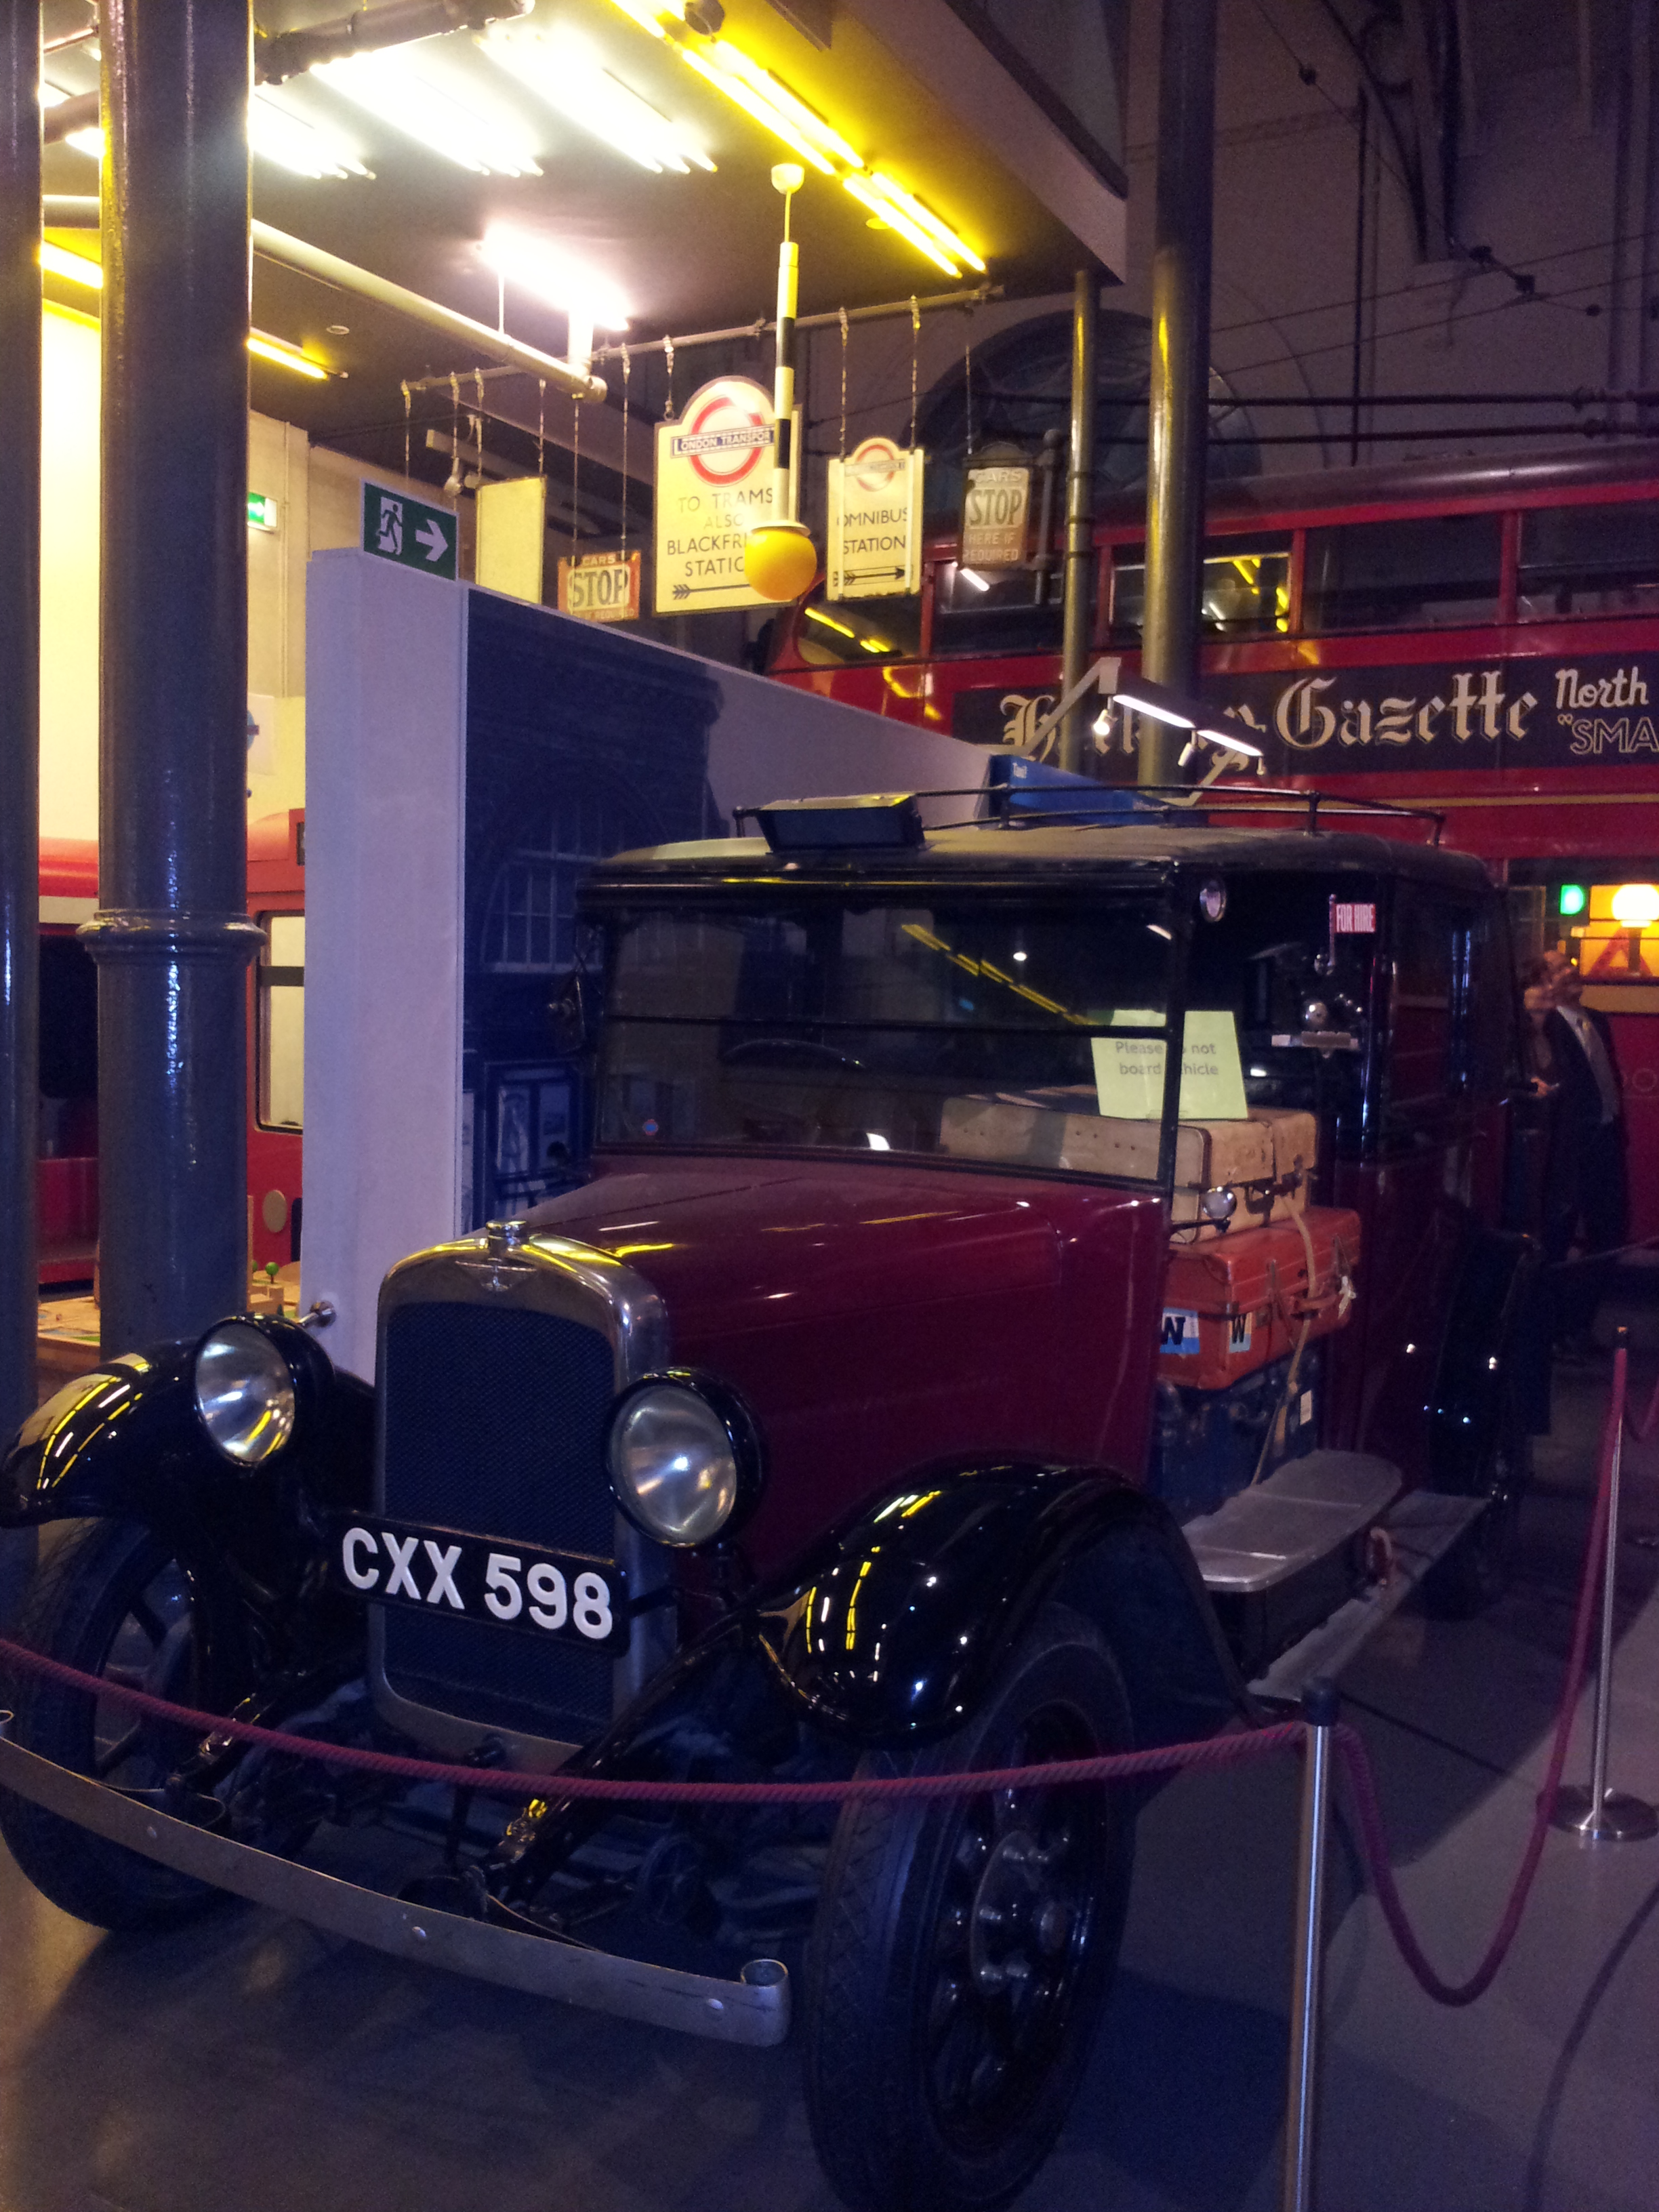 Night at the Museum in London - taxi